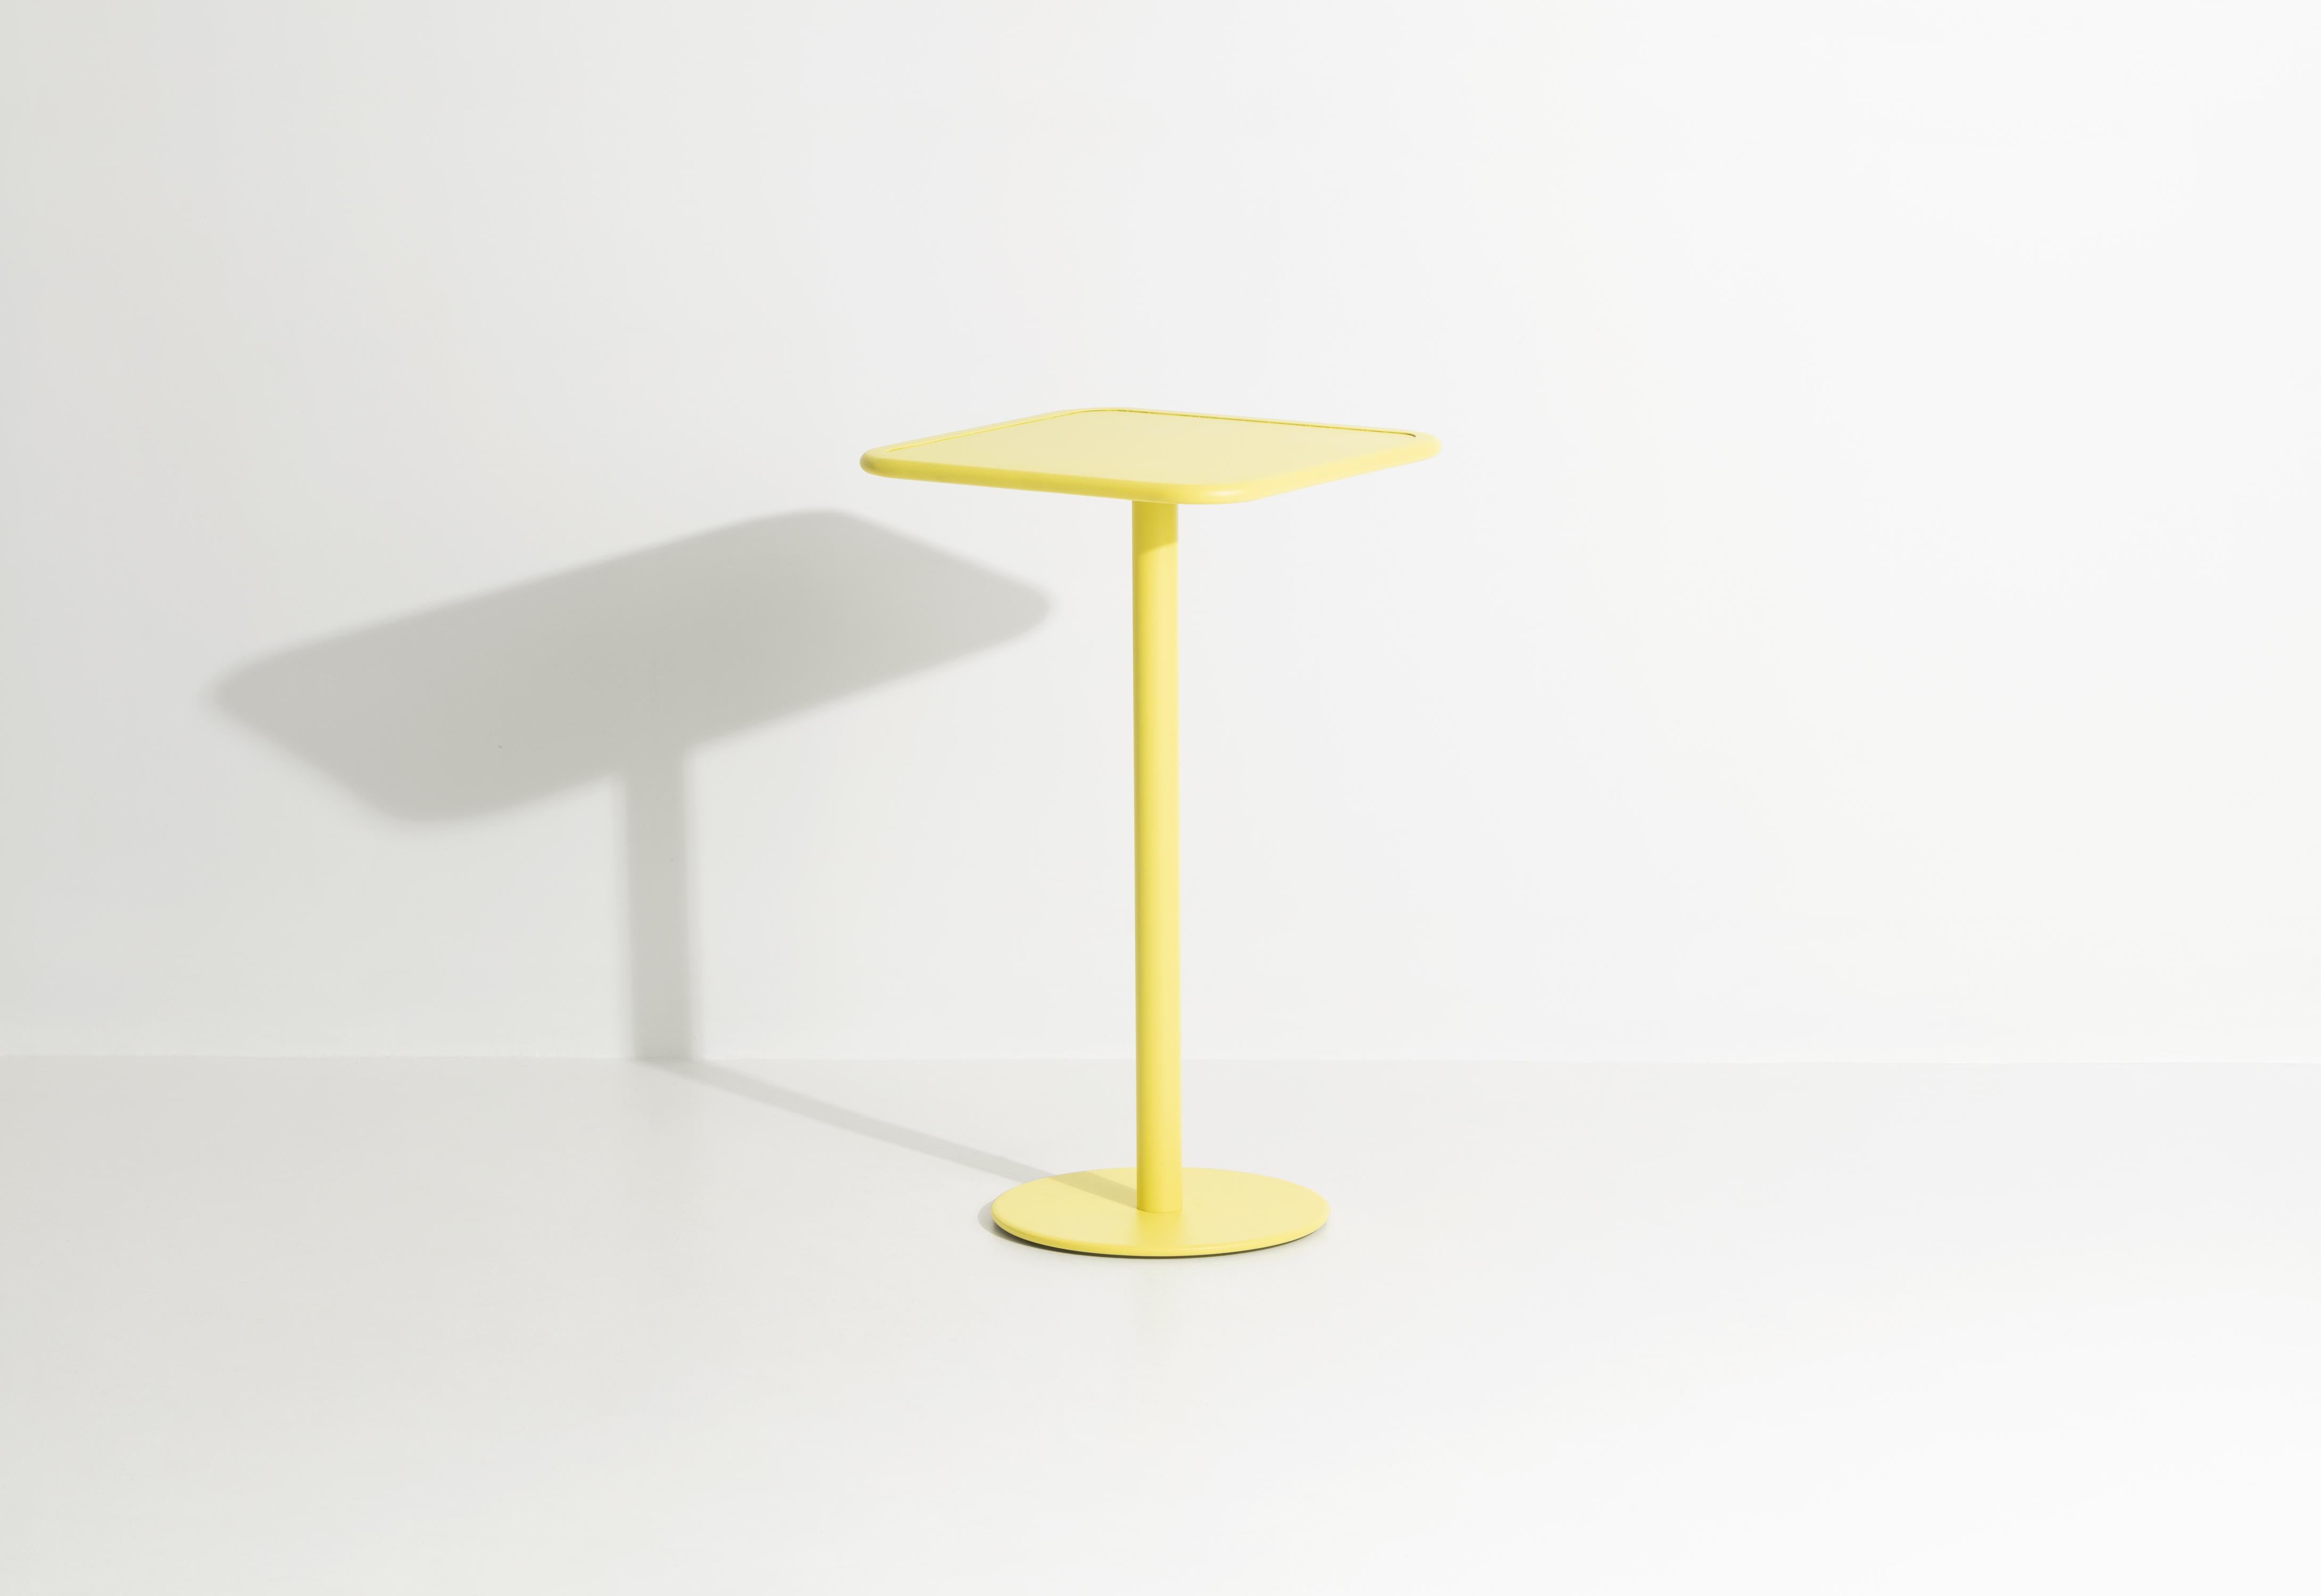 Chinese Petite Friture Week-End Square High Table in Yellow Aluminium, 2017 For Sale